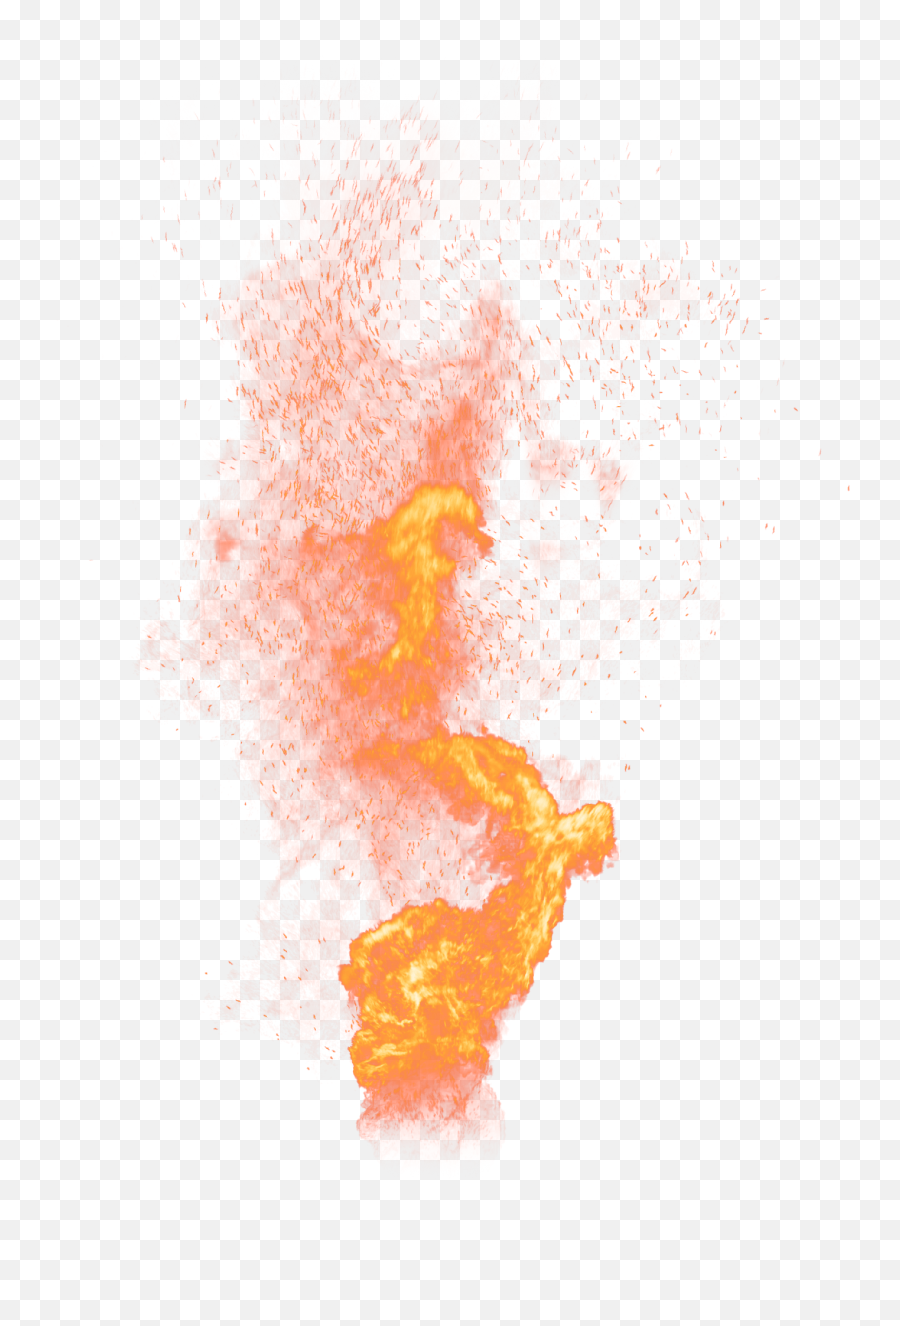 Hd Vfx Looping Fire With Embers - Stain Emoji,Fire Embers Png